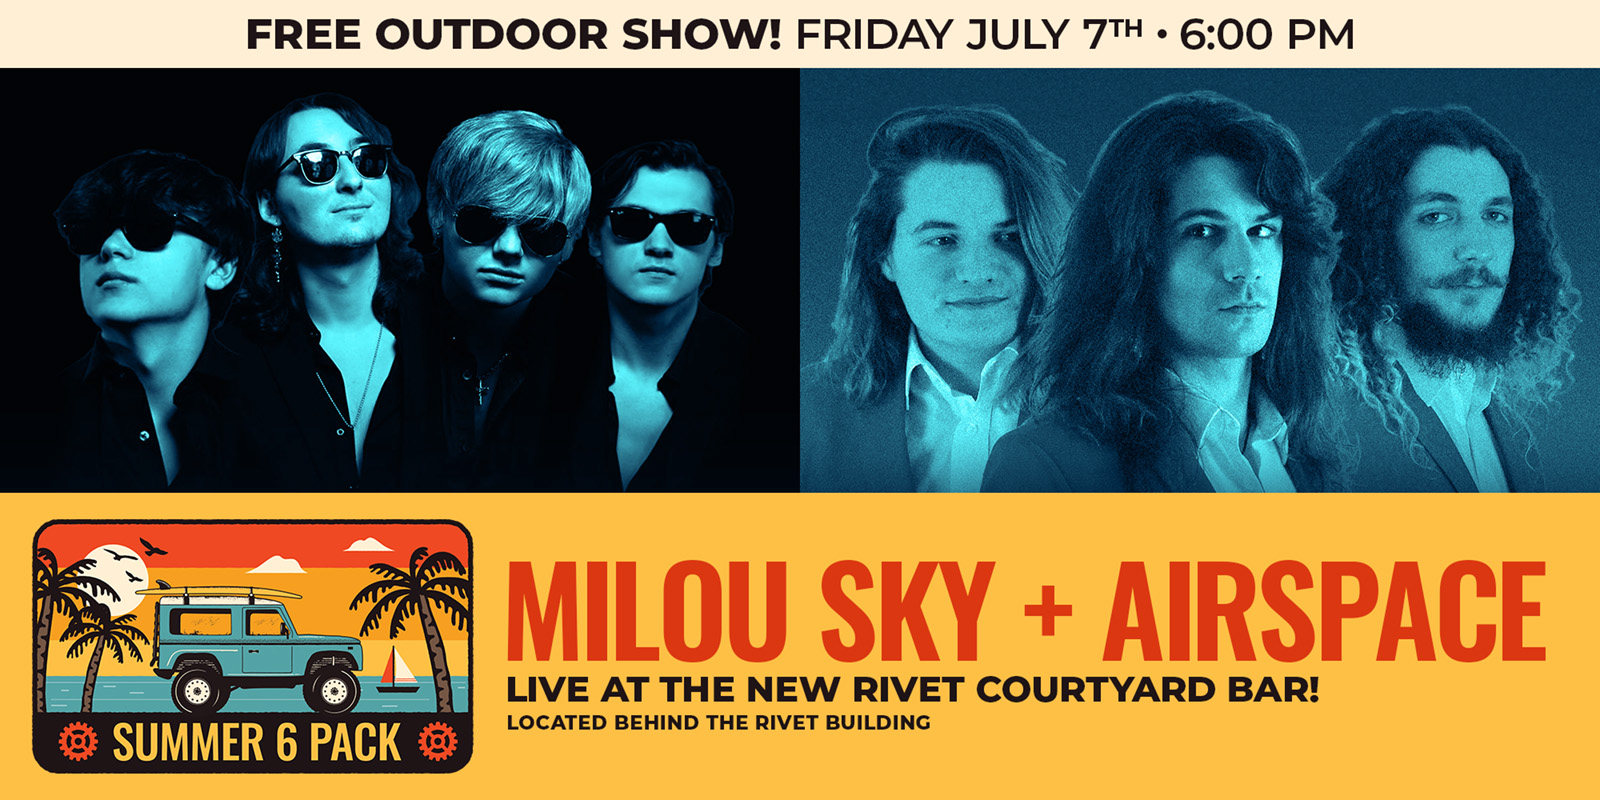 The Summer 6 Pack Free Outdoor Series continues at Rivet: Canteen & Assembly with Milou Sky and Airspace on Friday, July 7th, 2023. Be there!